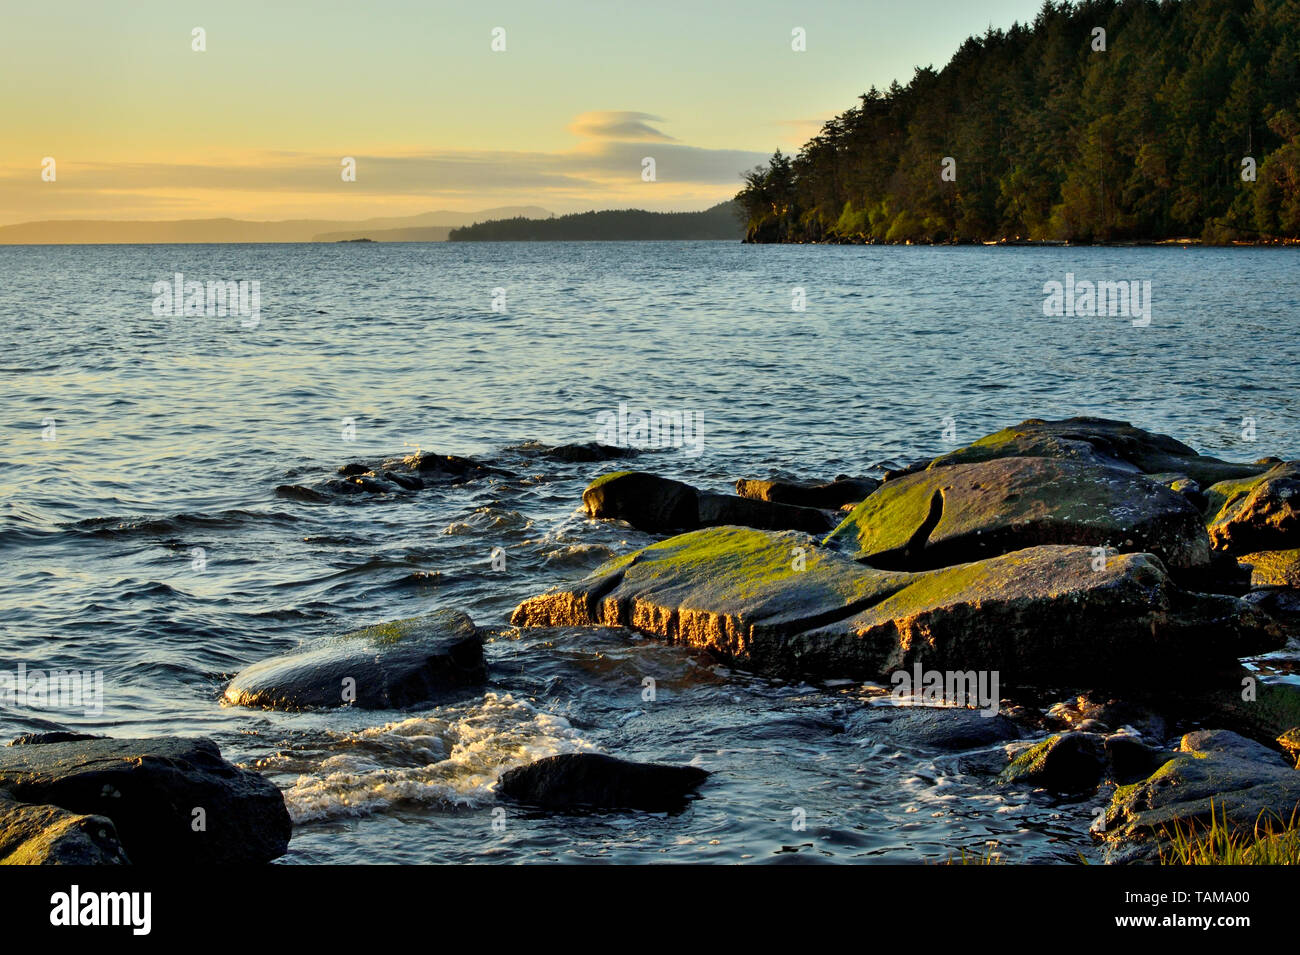 A morning light landscape image along the rocky shore of Vancouver Island British Columbia Canada. Stock Photo